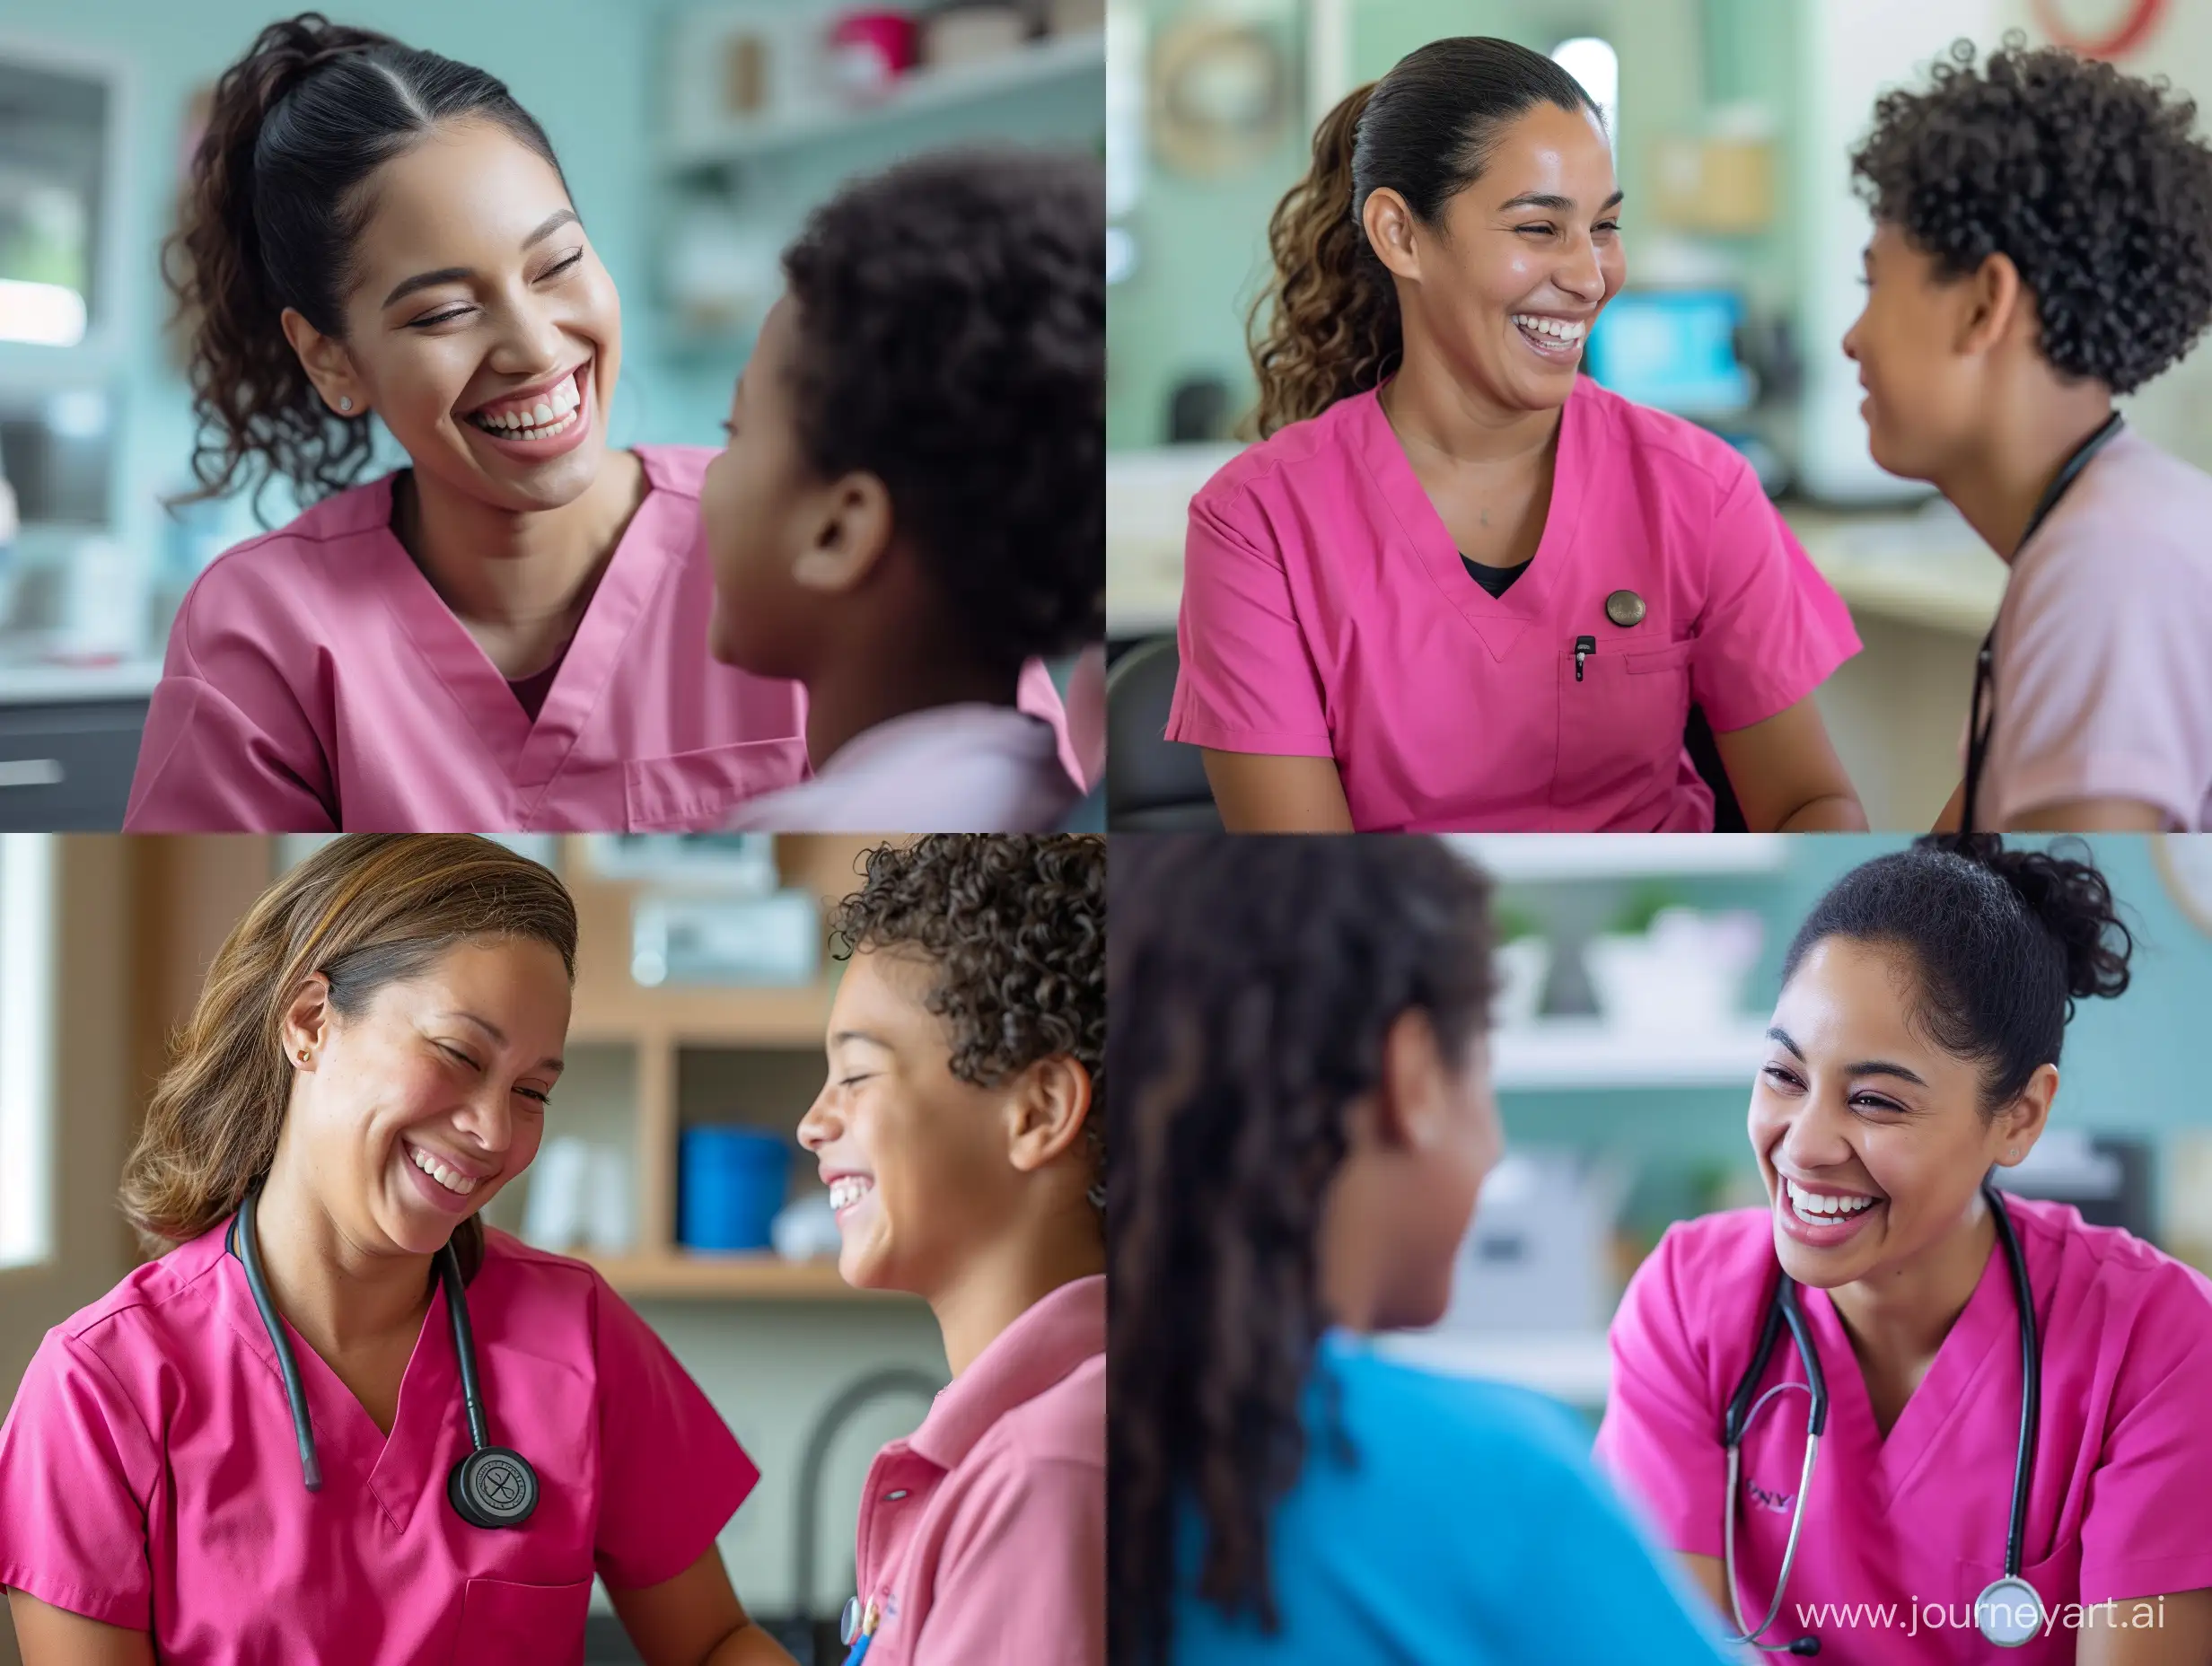 Caring-Female-Doctor-Examining-Smiling-Patient-in-Pink-Scrubs